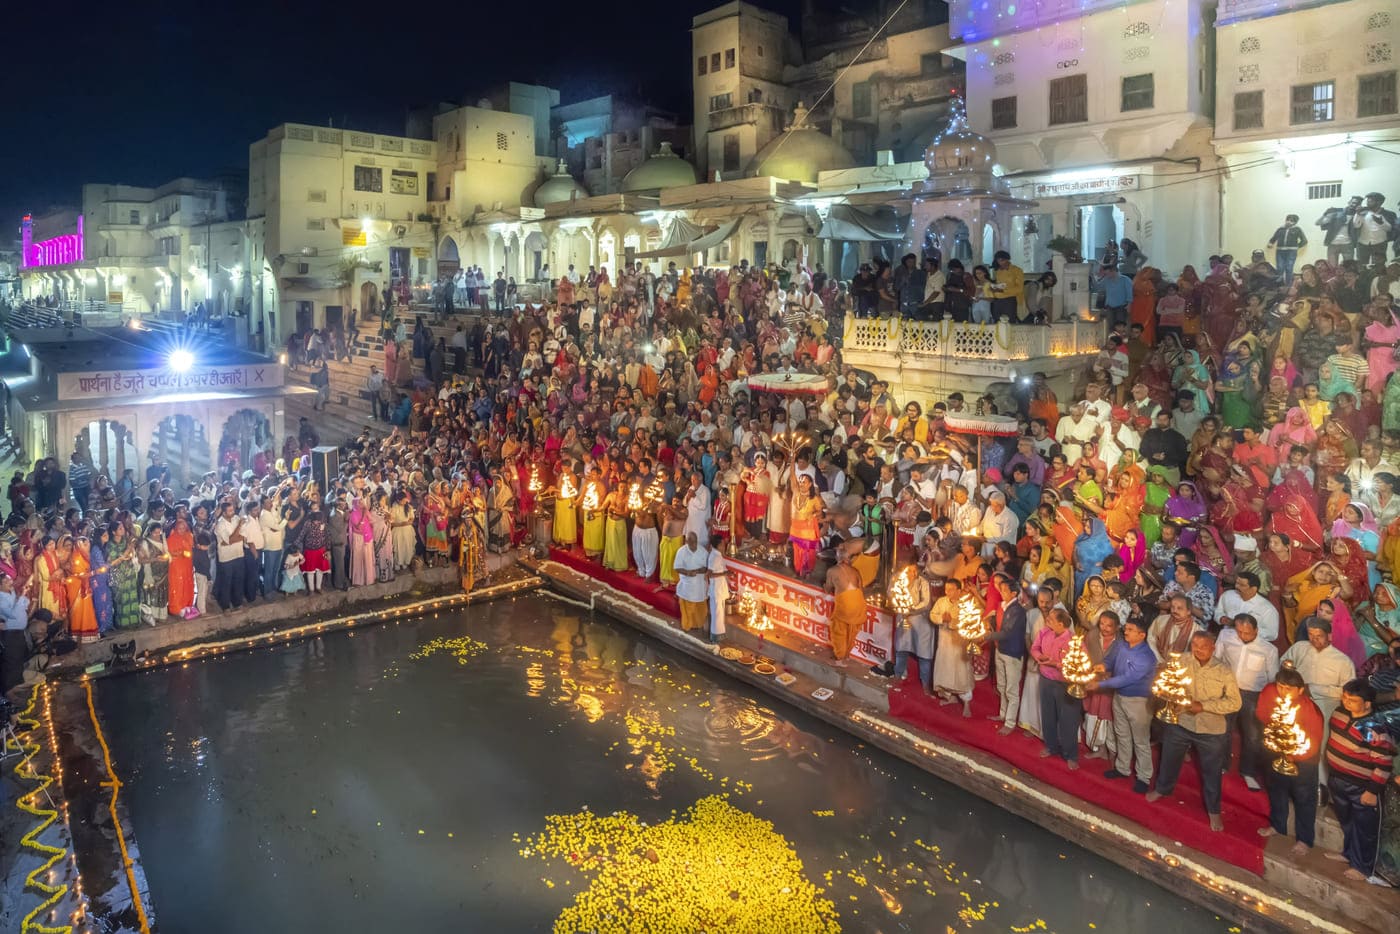 The Kartik Purnima, a Hindu, Jain and Sikh cultural festival, is celebrated on the fifteenth lunar day of Kartik. Crowds of people attend this occasion at Pushkar Ghat 